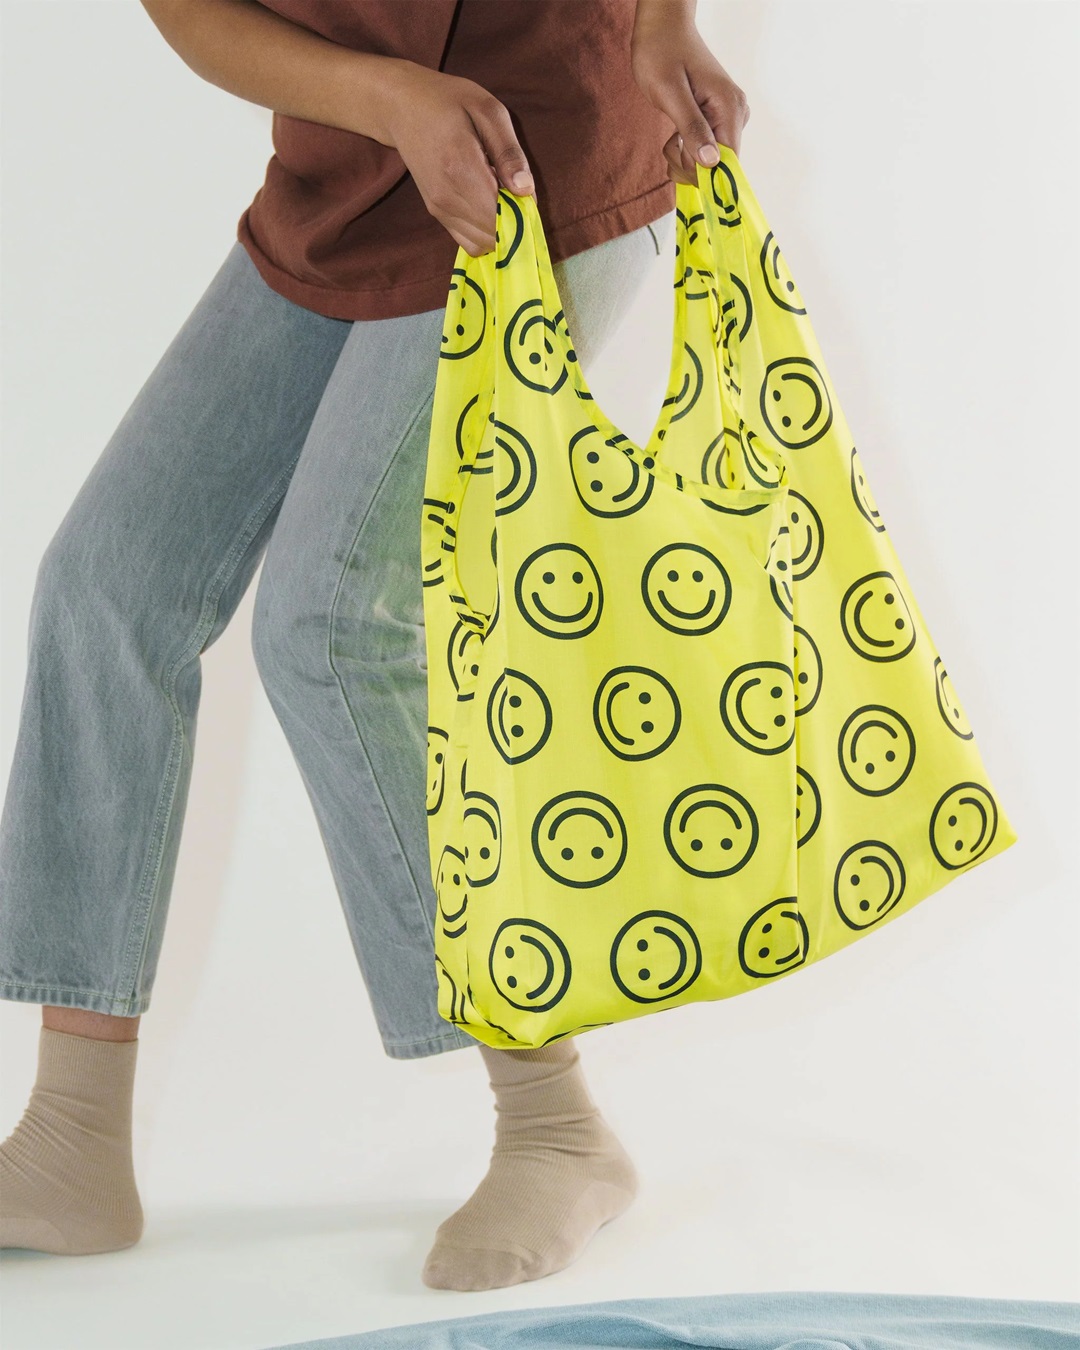 Yellow smiley face bag being carried